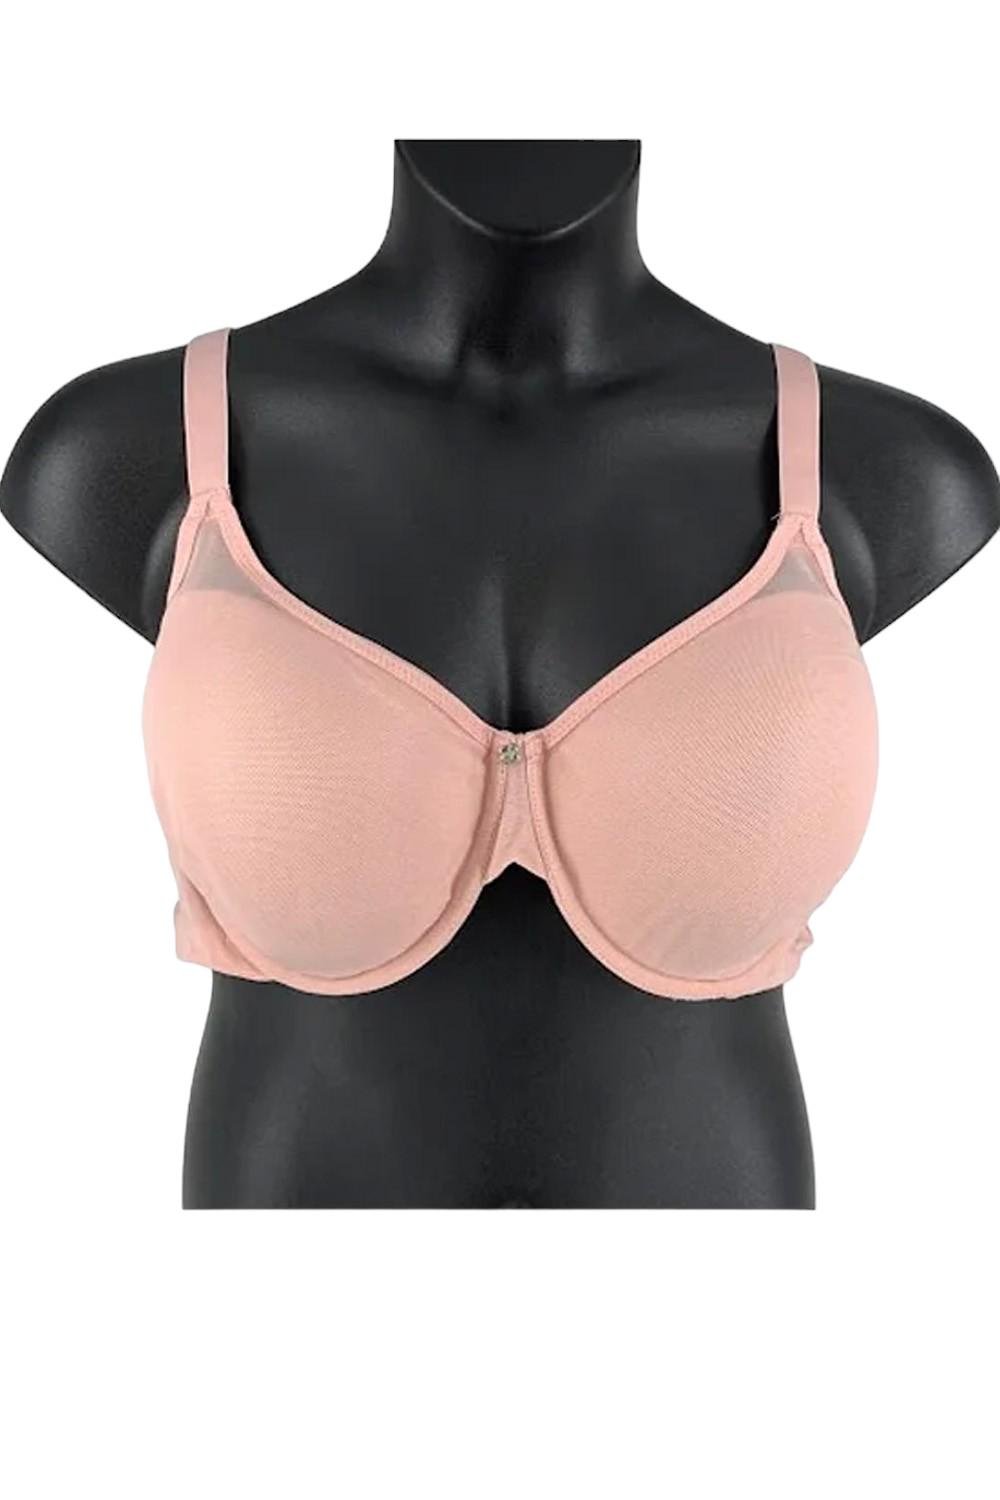 Jockey Forever Fit Molded Cup Active Lifestyle Bra ROSE PETAL 2X